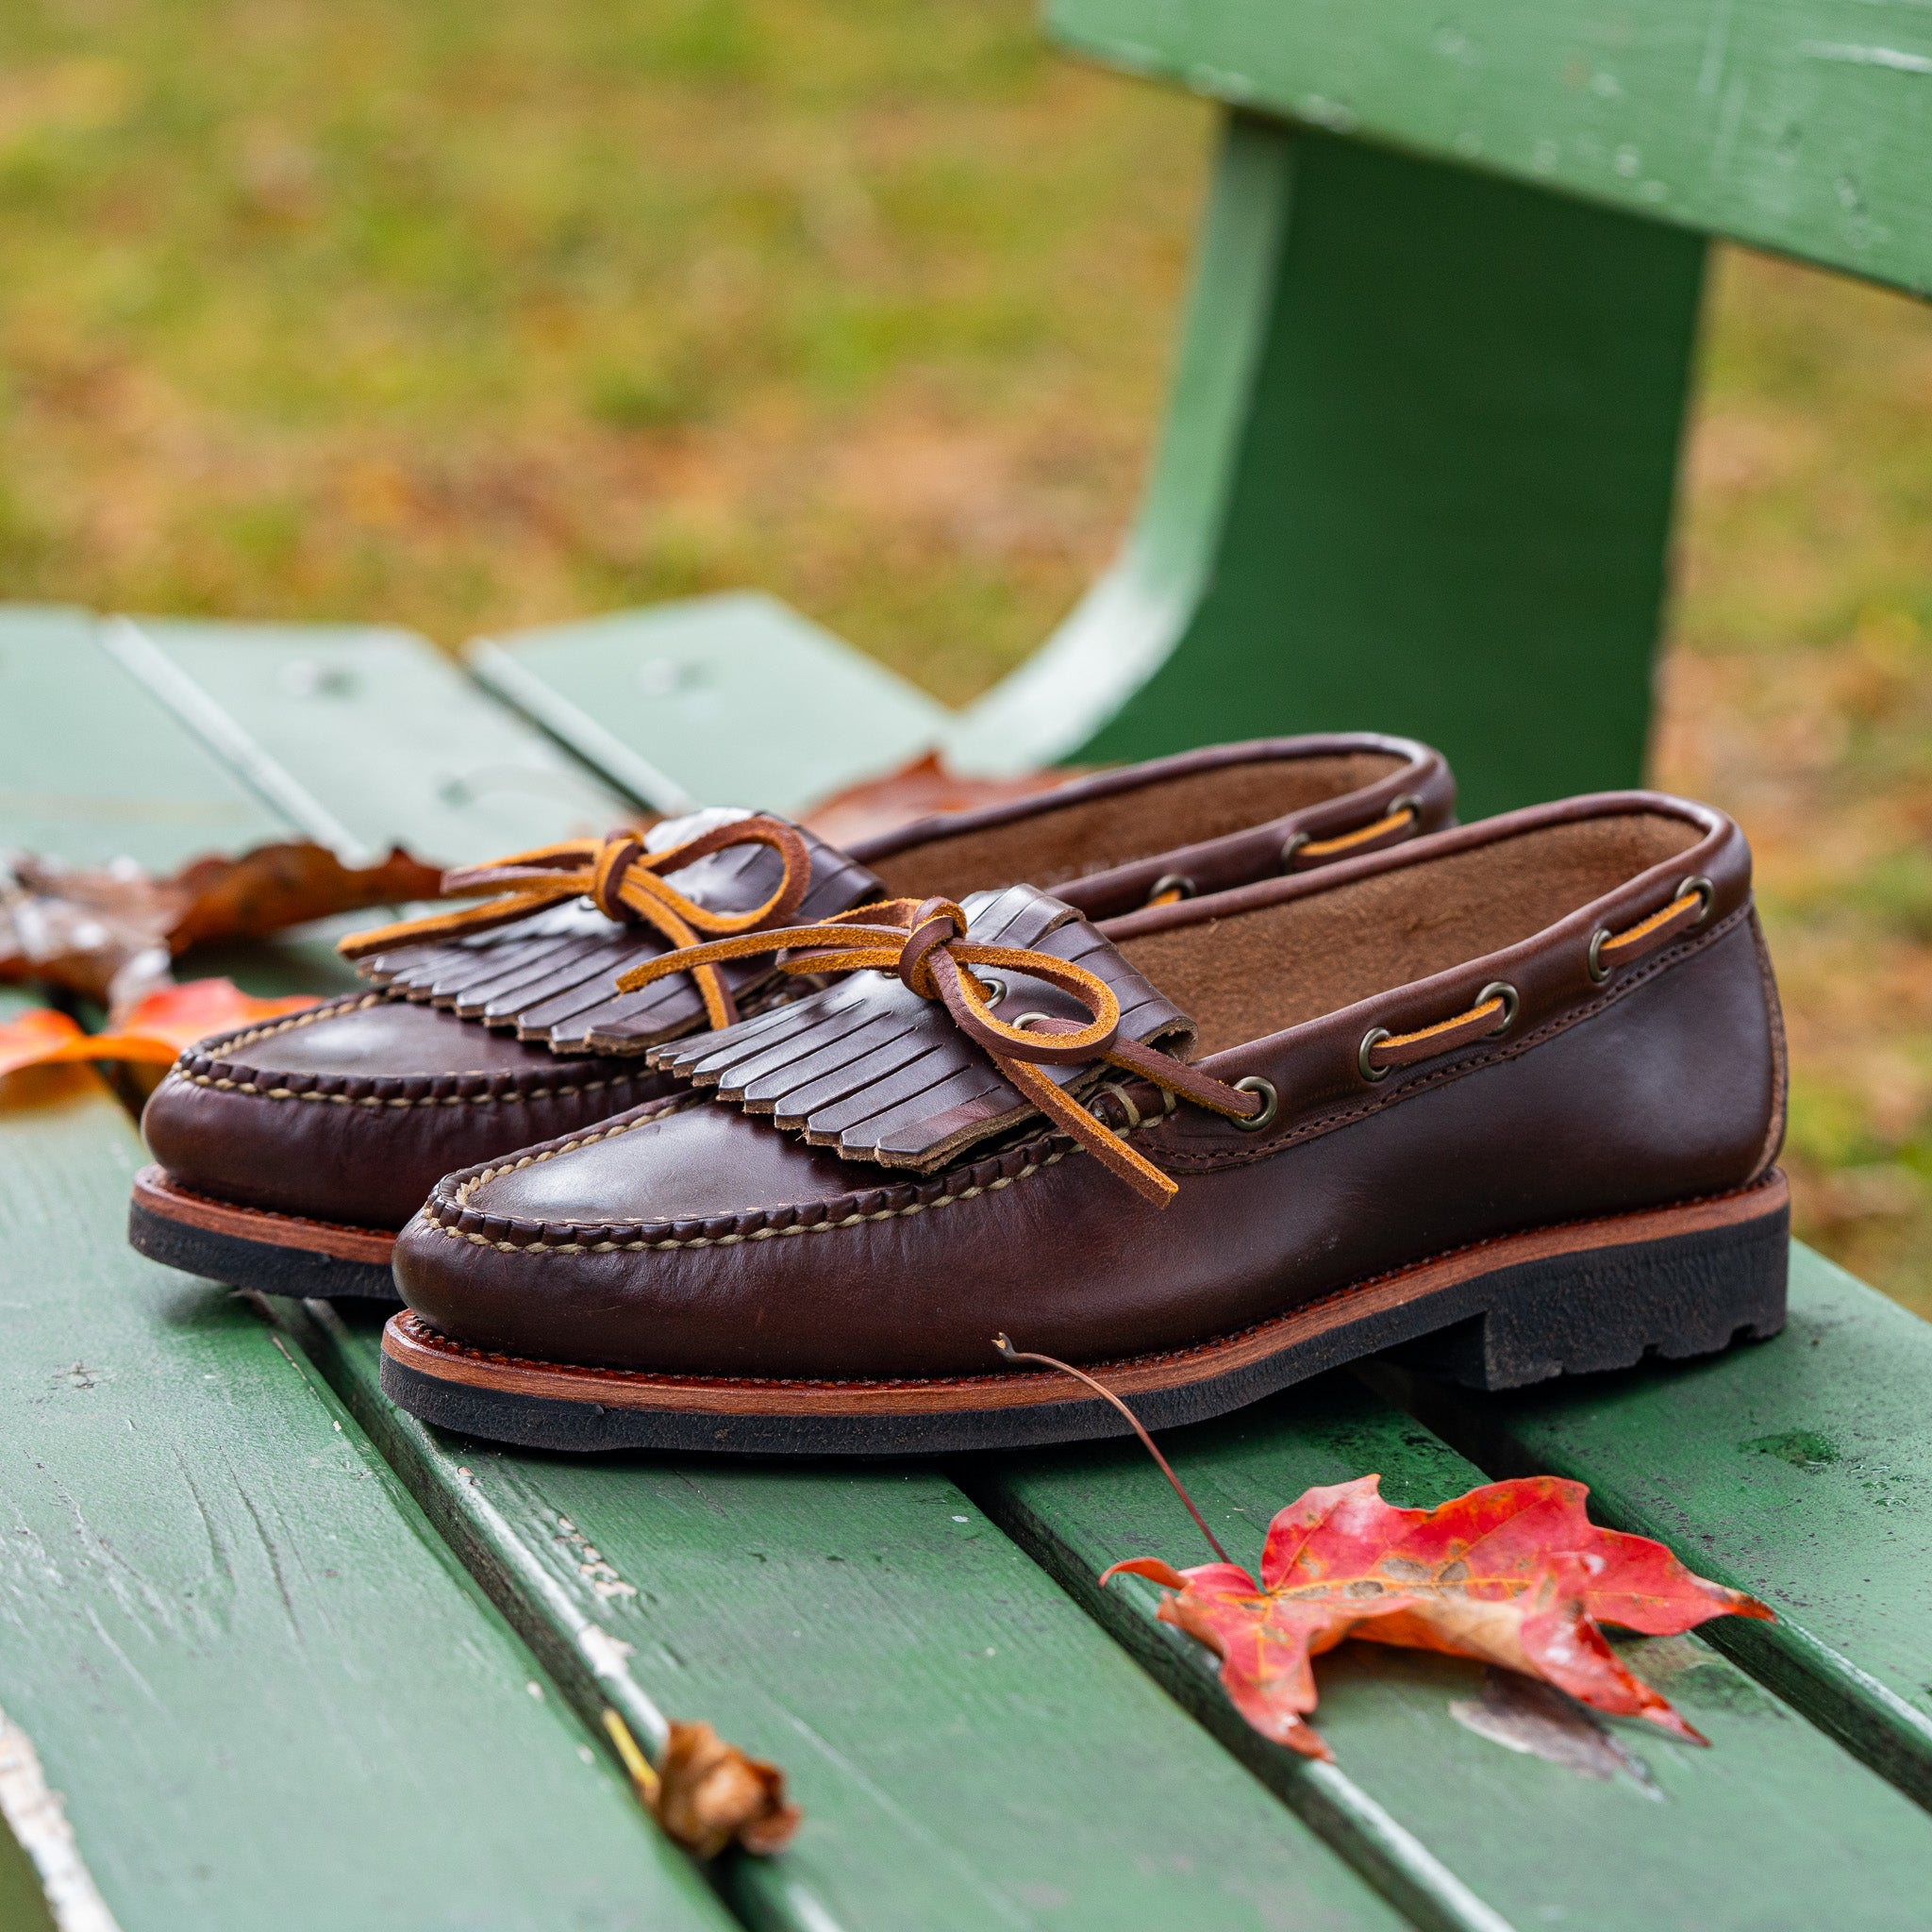 Beefroll Penny Loafers - Carolina Brown Chromexcel